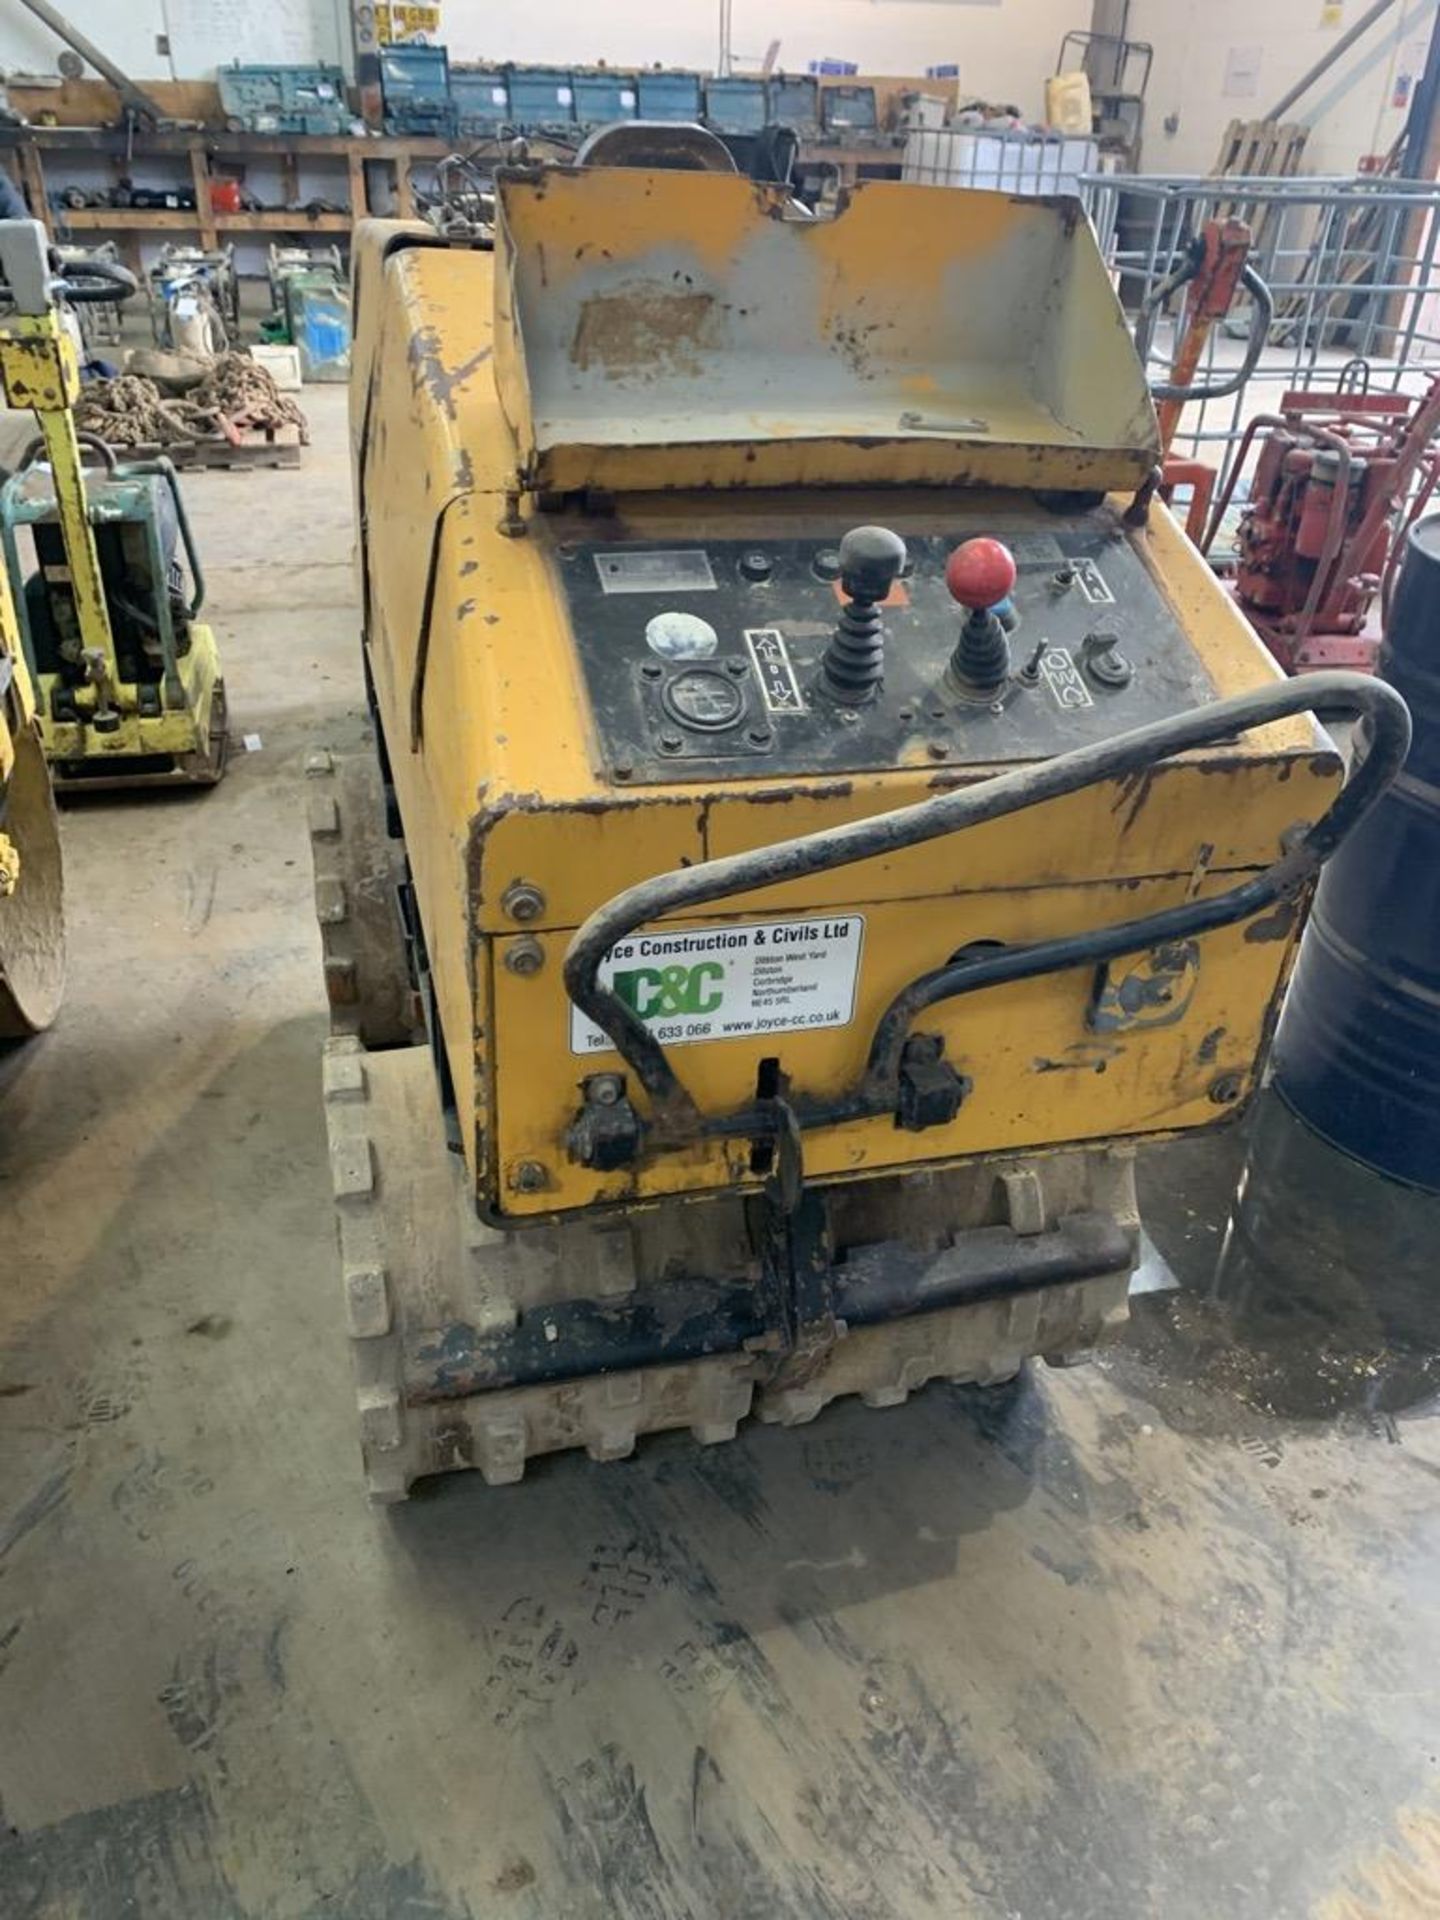 Vibromax, VM 1500 Vibratory Trench Roller with Radio Control Serial No. 325H1030 Date of - Image 2 of 3